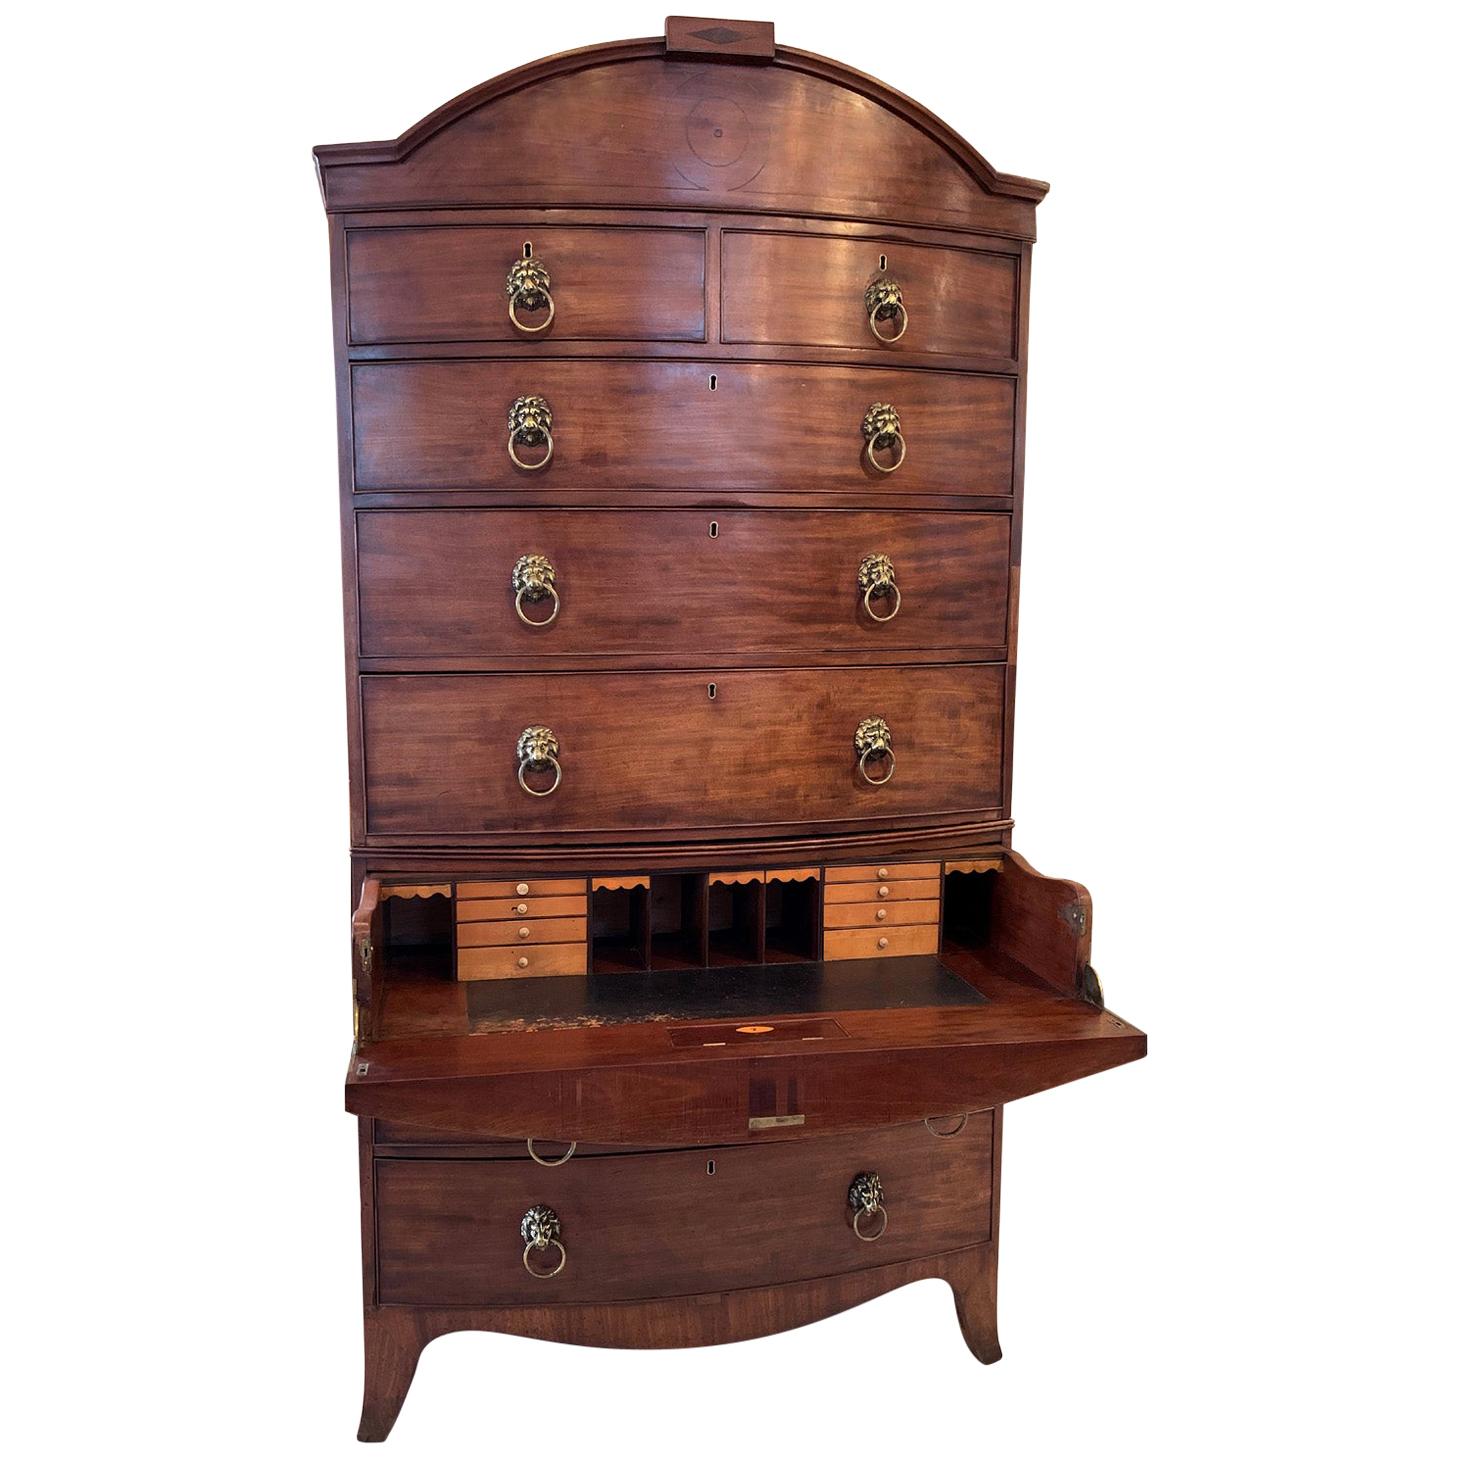 Early Tall English Sheridan Bow Front Chest/Desk